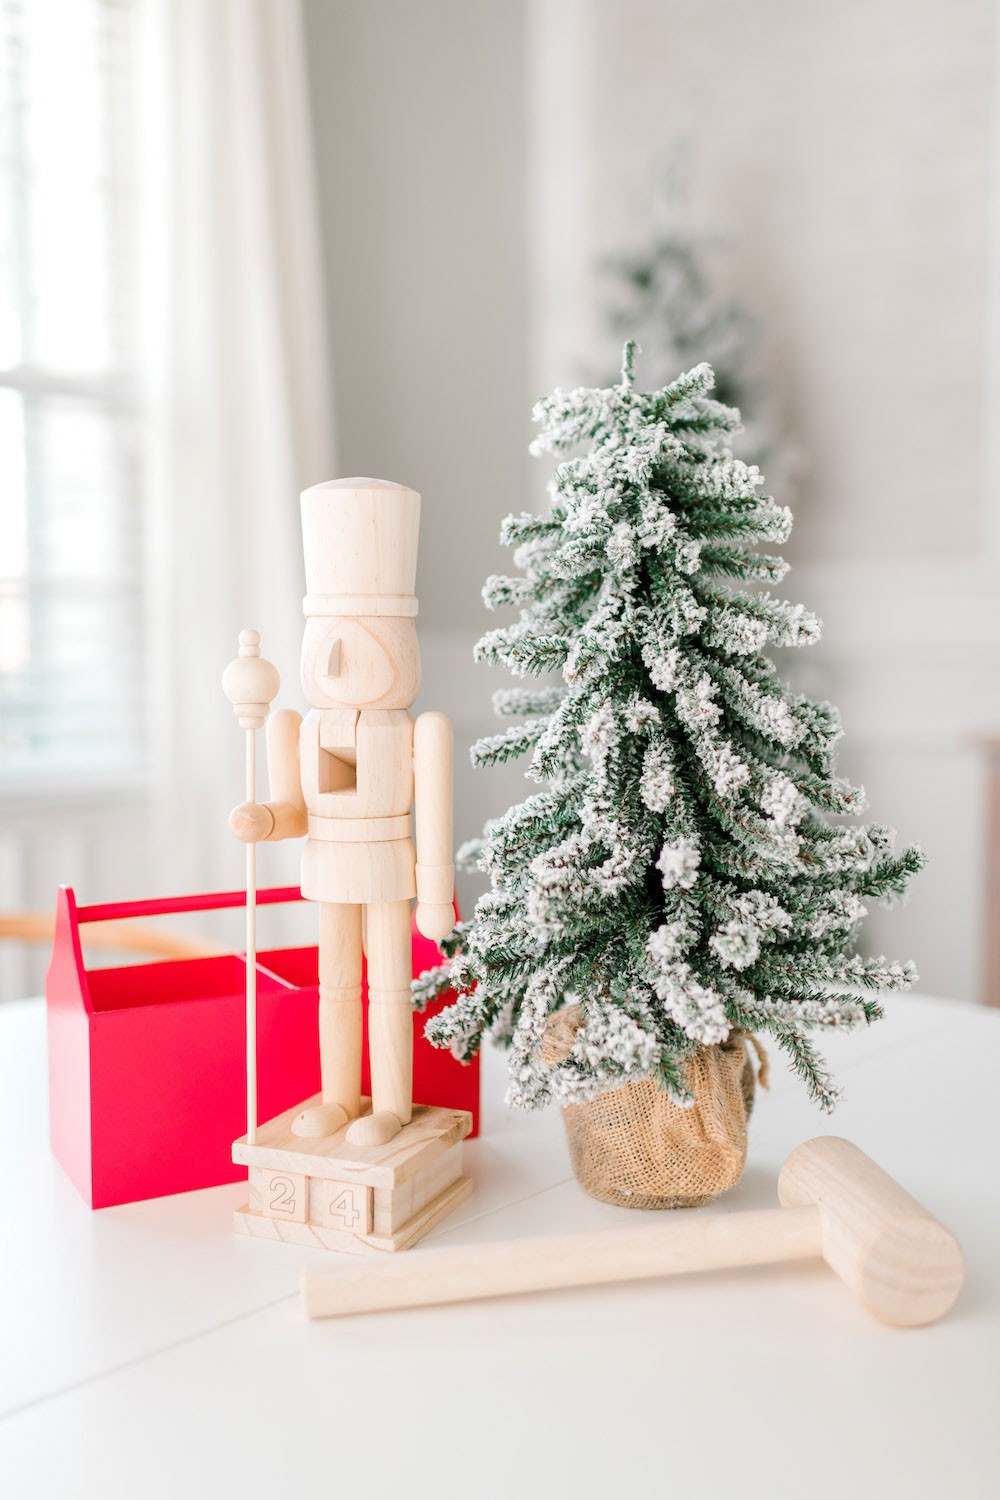 Celebrating the Holidays with Santa’s Workshop Craft Space